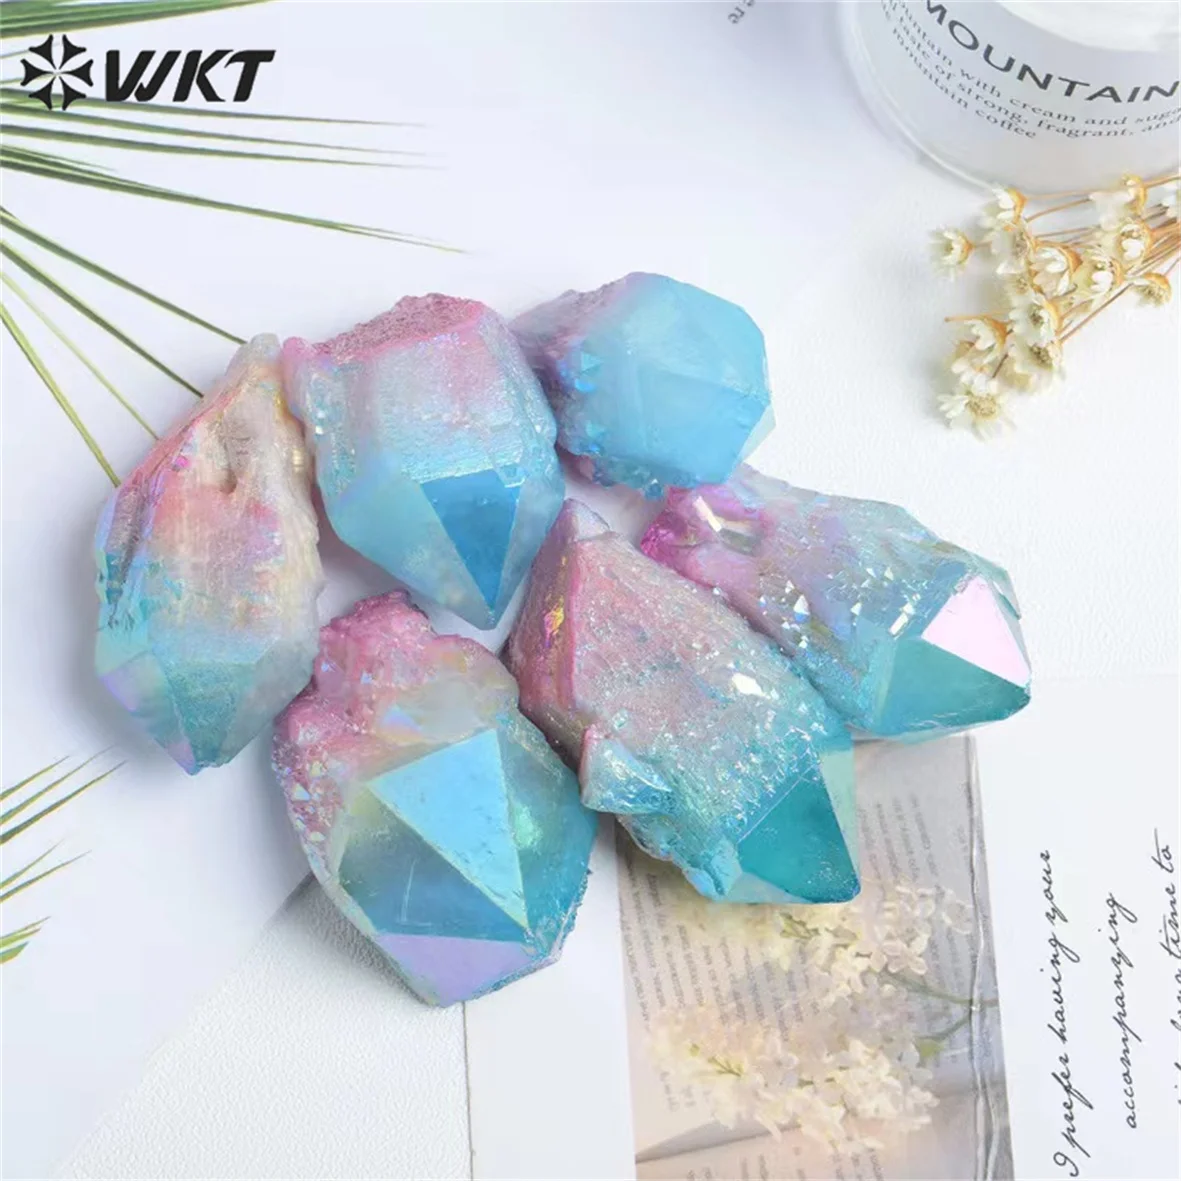 

WT-G313 WKT Wholesale Shiny Energy Colorful Stone Geode Quartz with Aura Loose Gemstones Jewelry Natural Stone Ornament